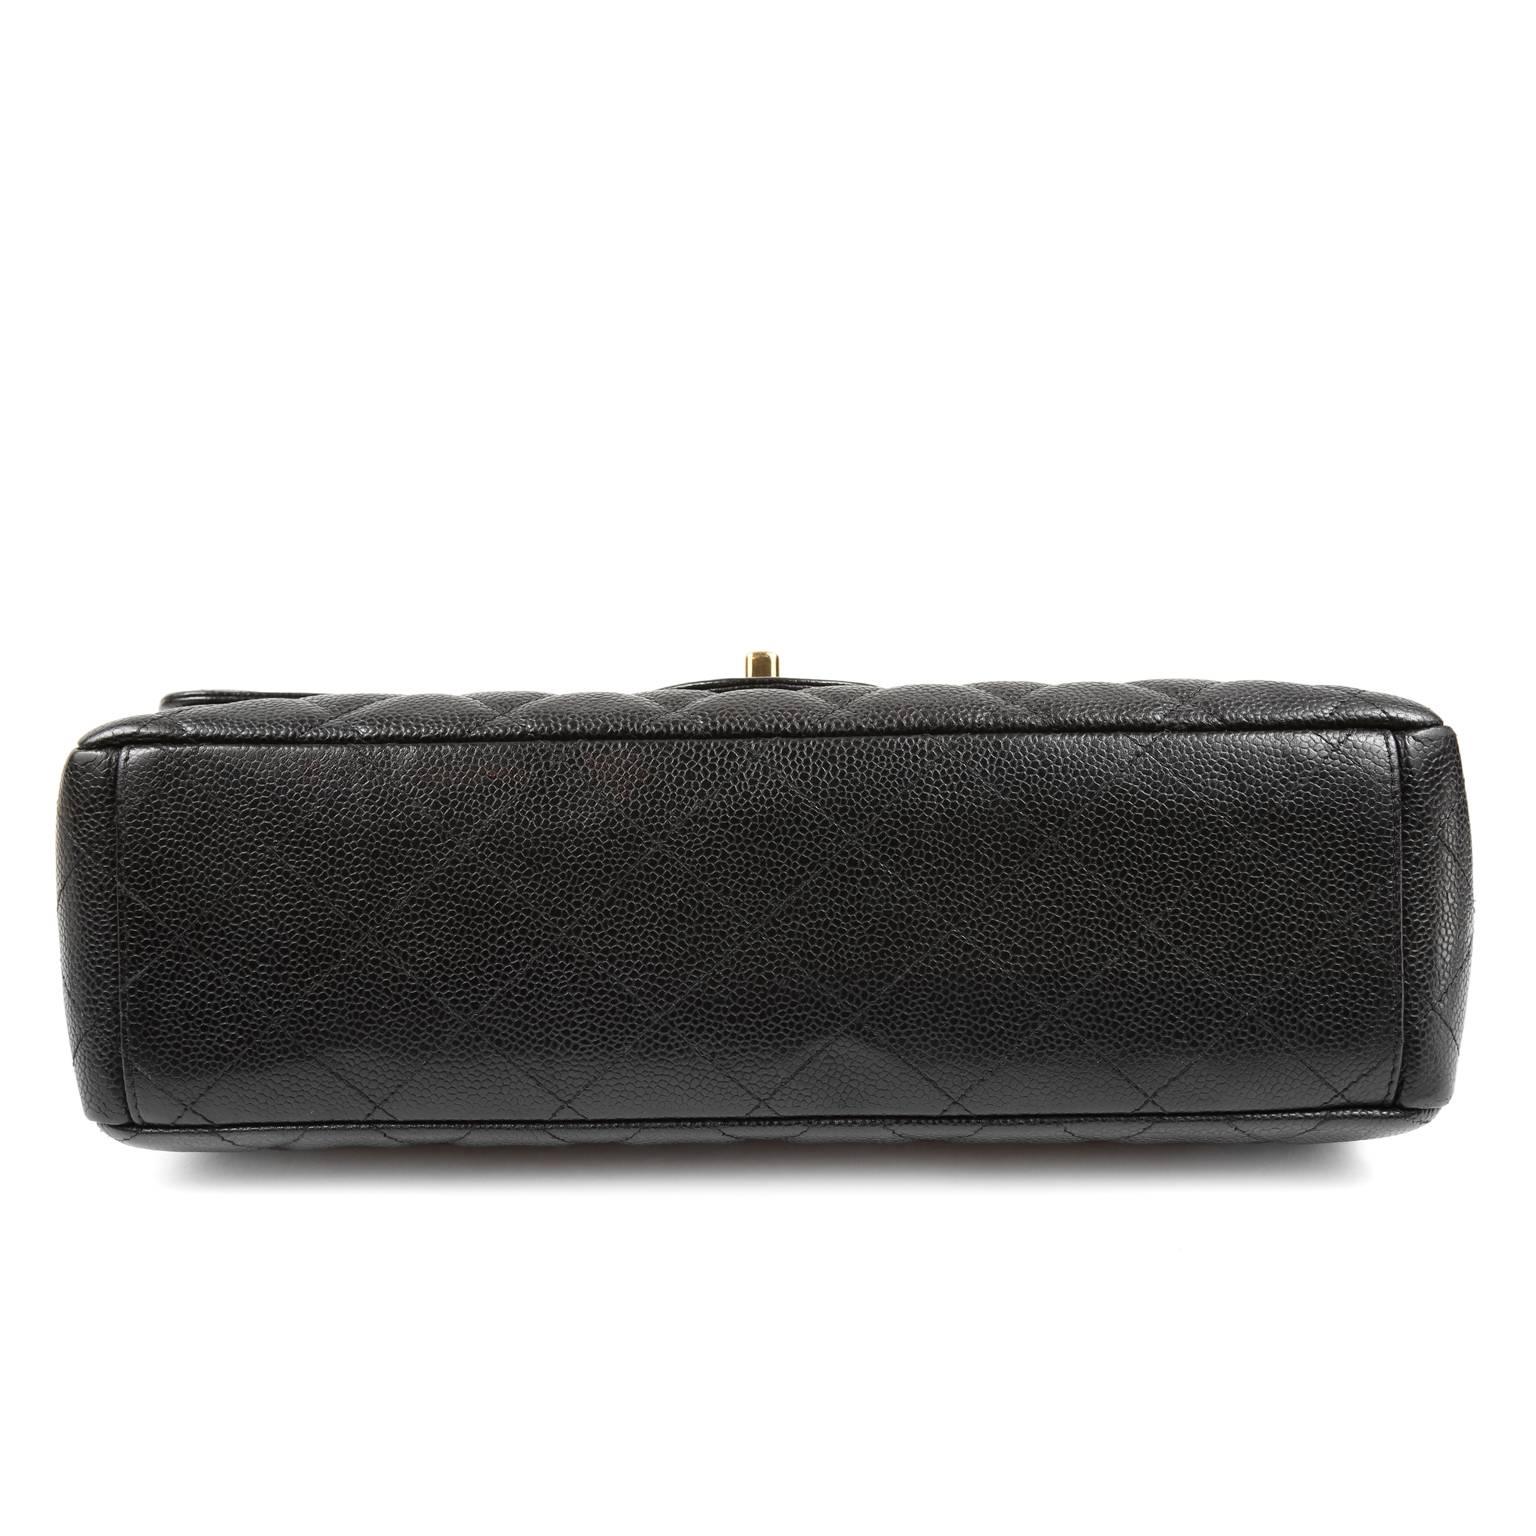 Women's Chanel Black Caviar Maxi Flap with Gold Hardware